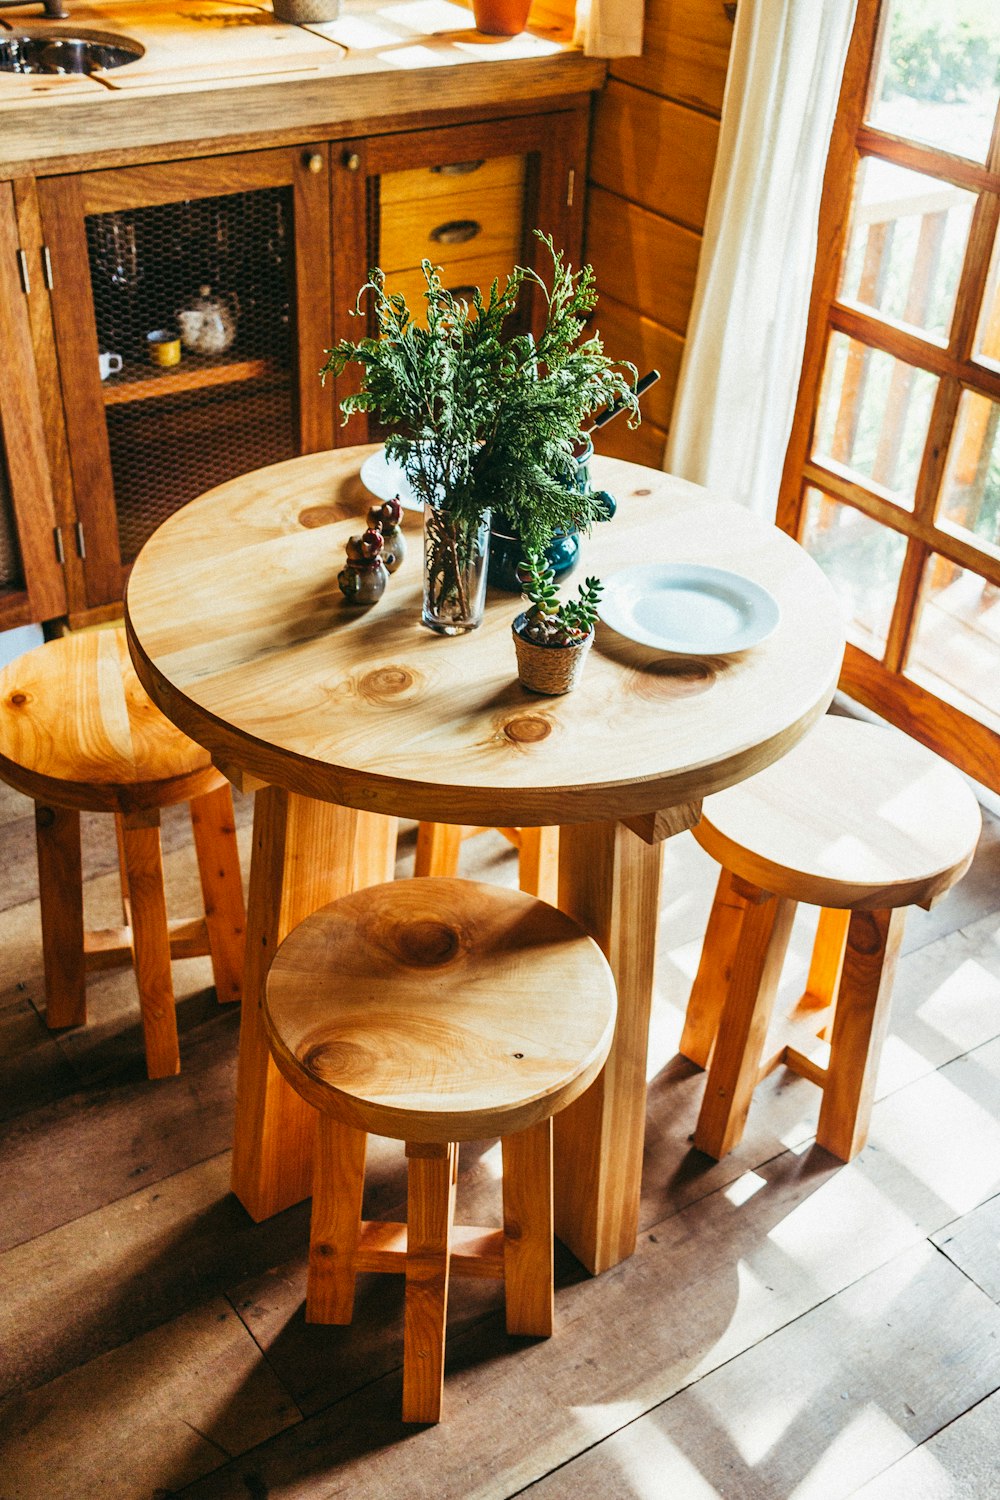 plants on brown wooden table indoors